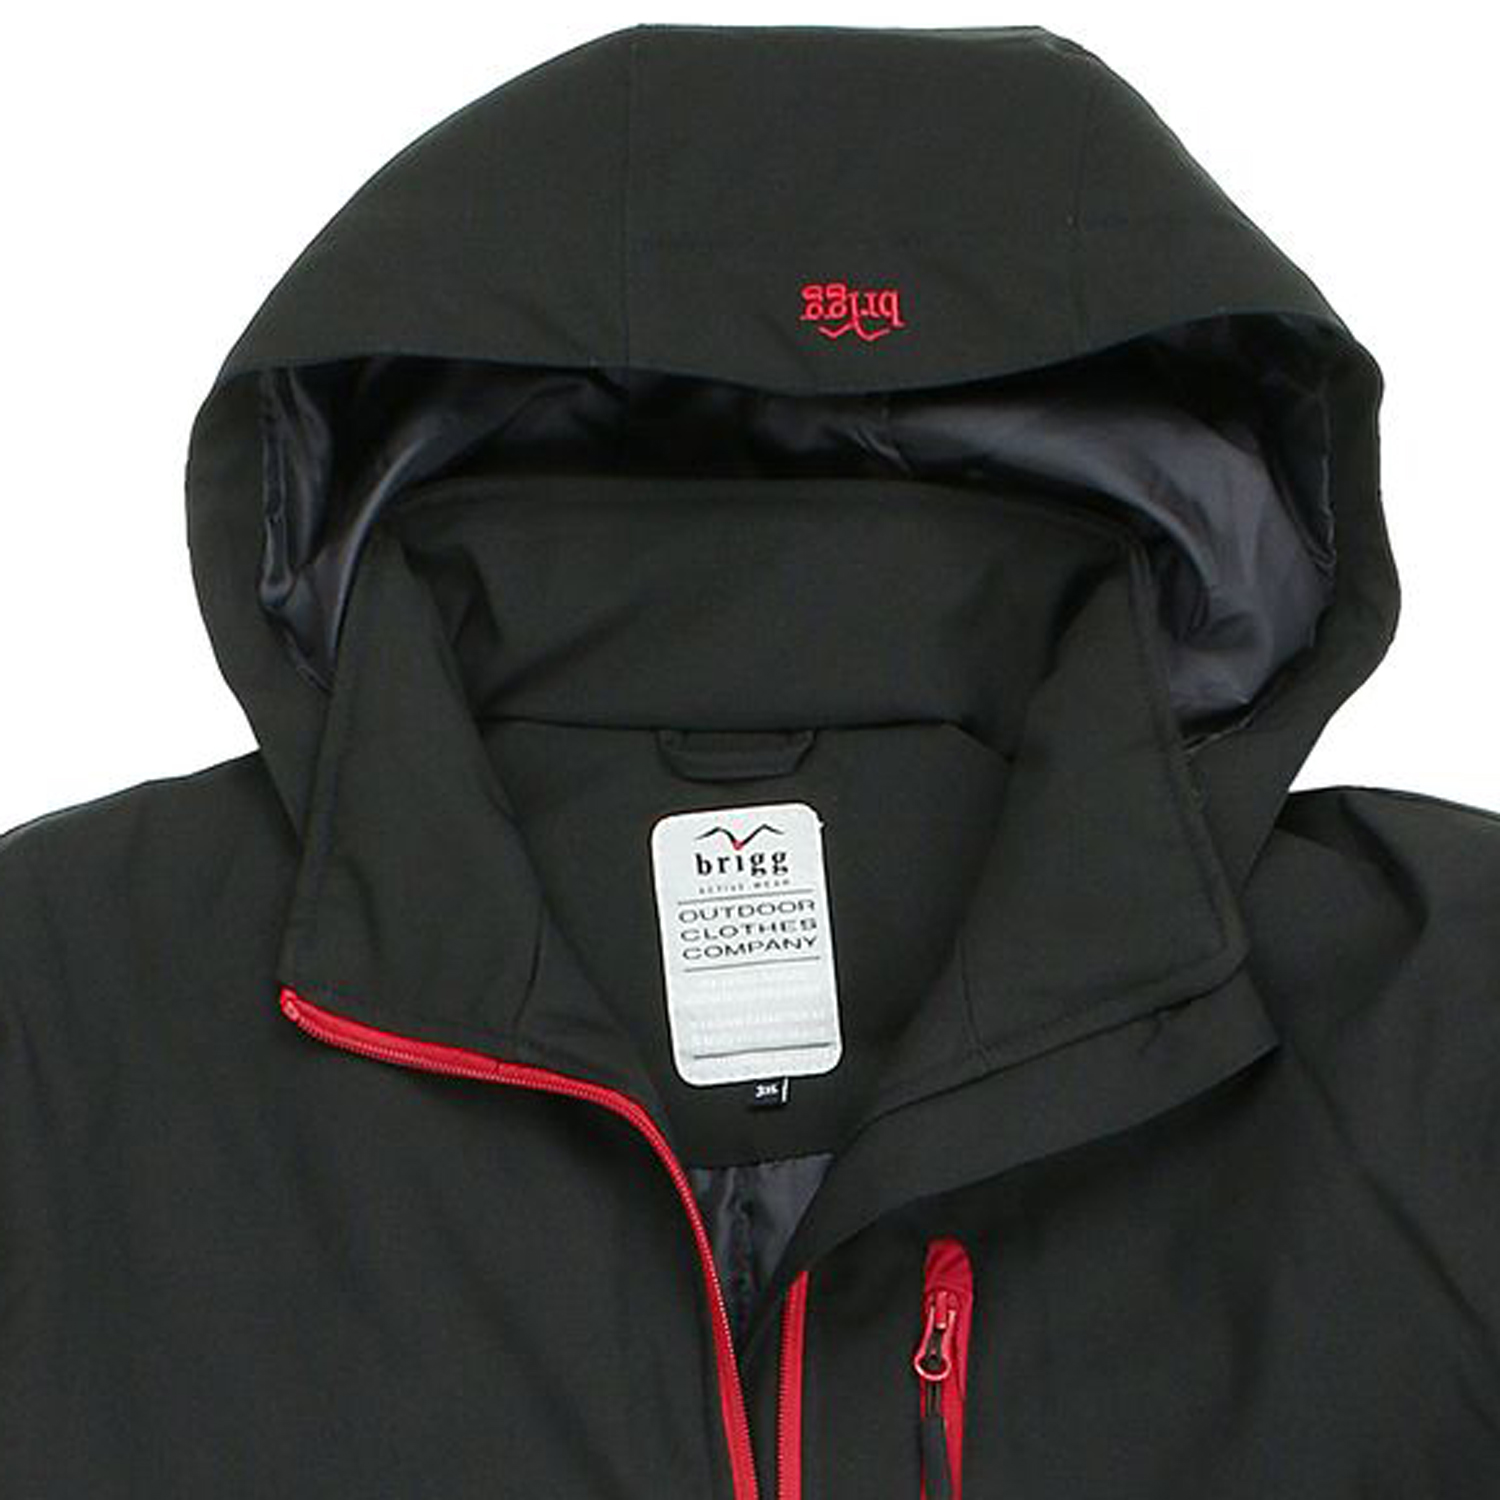 Lined softshell jacket in black by Brigg in oversizes up to 10XL